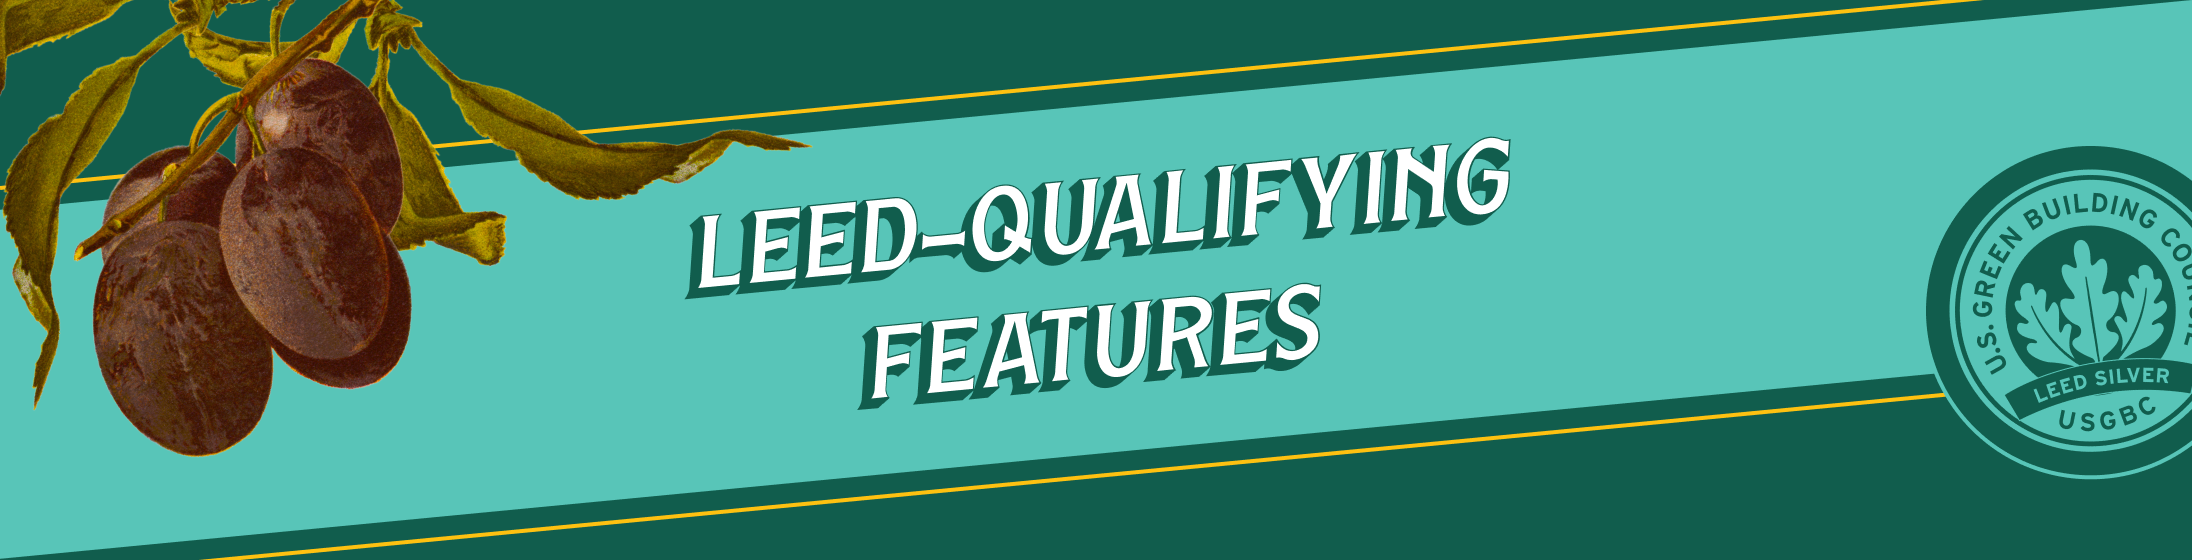 LEED-qualifying features